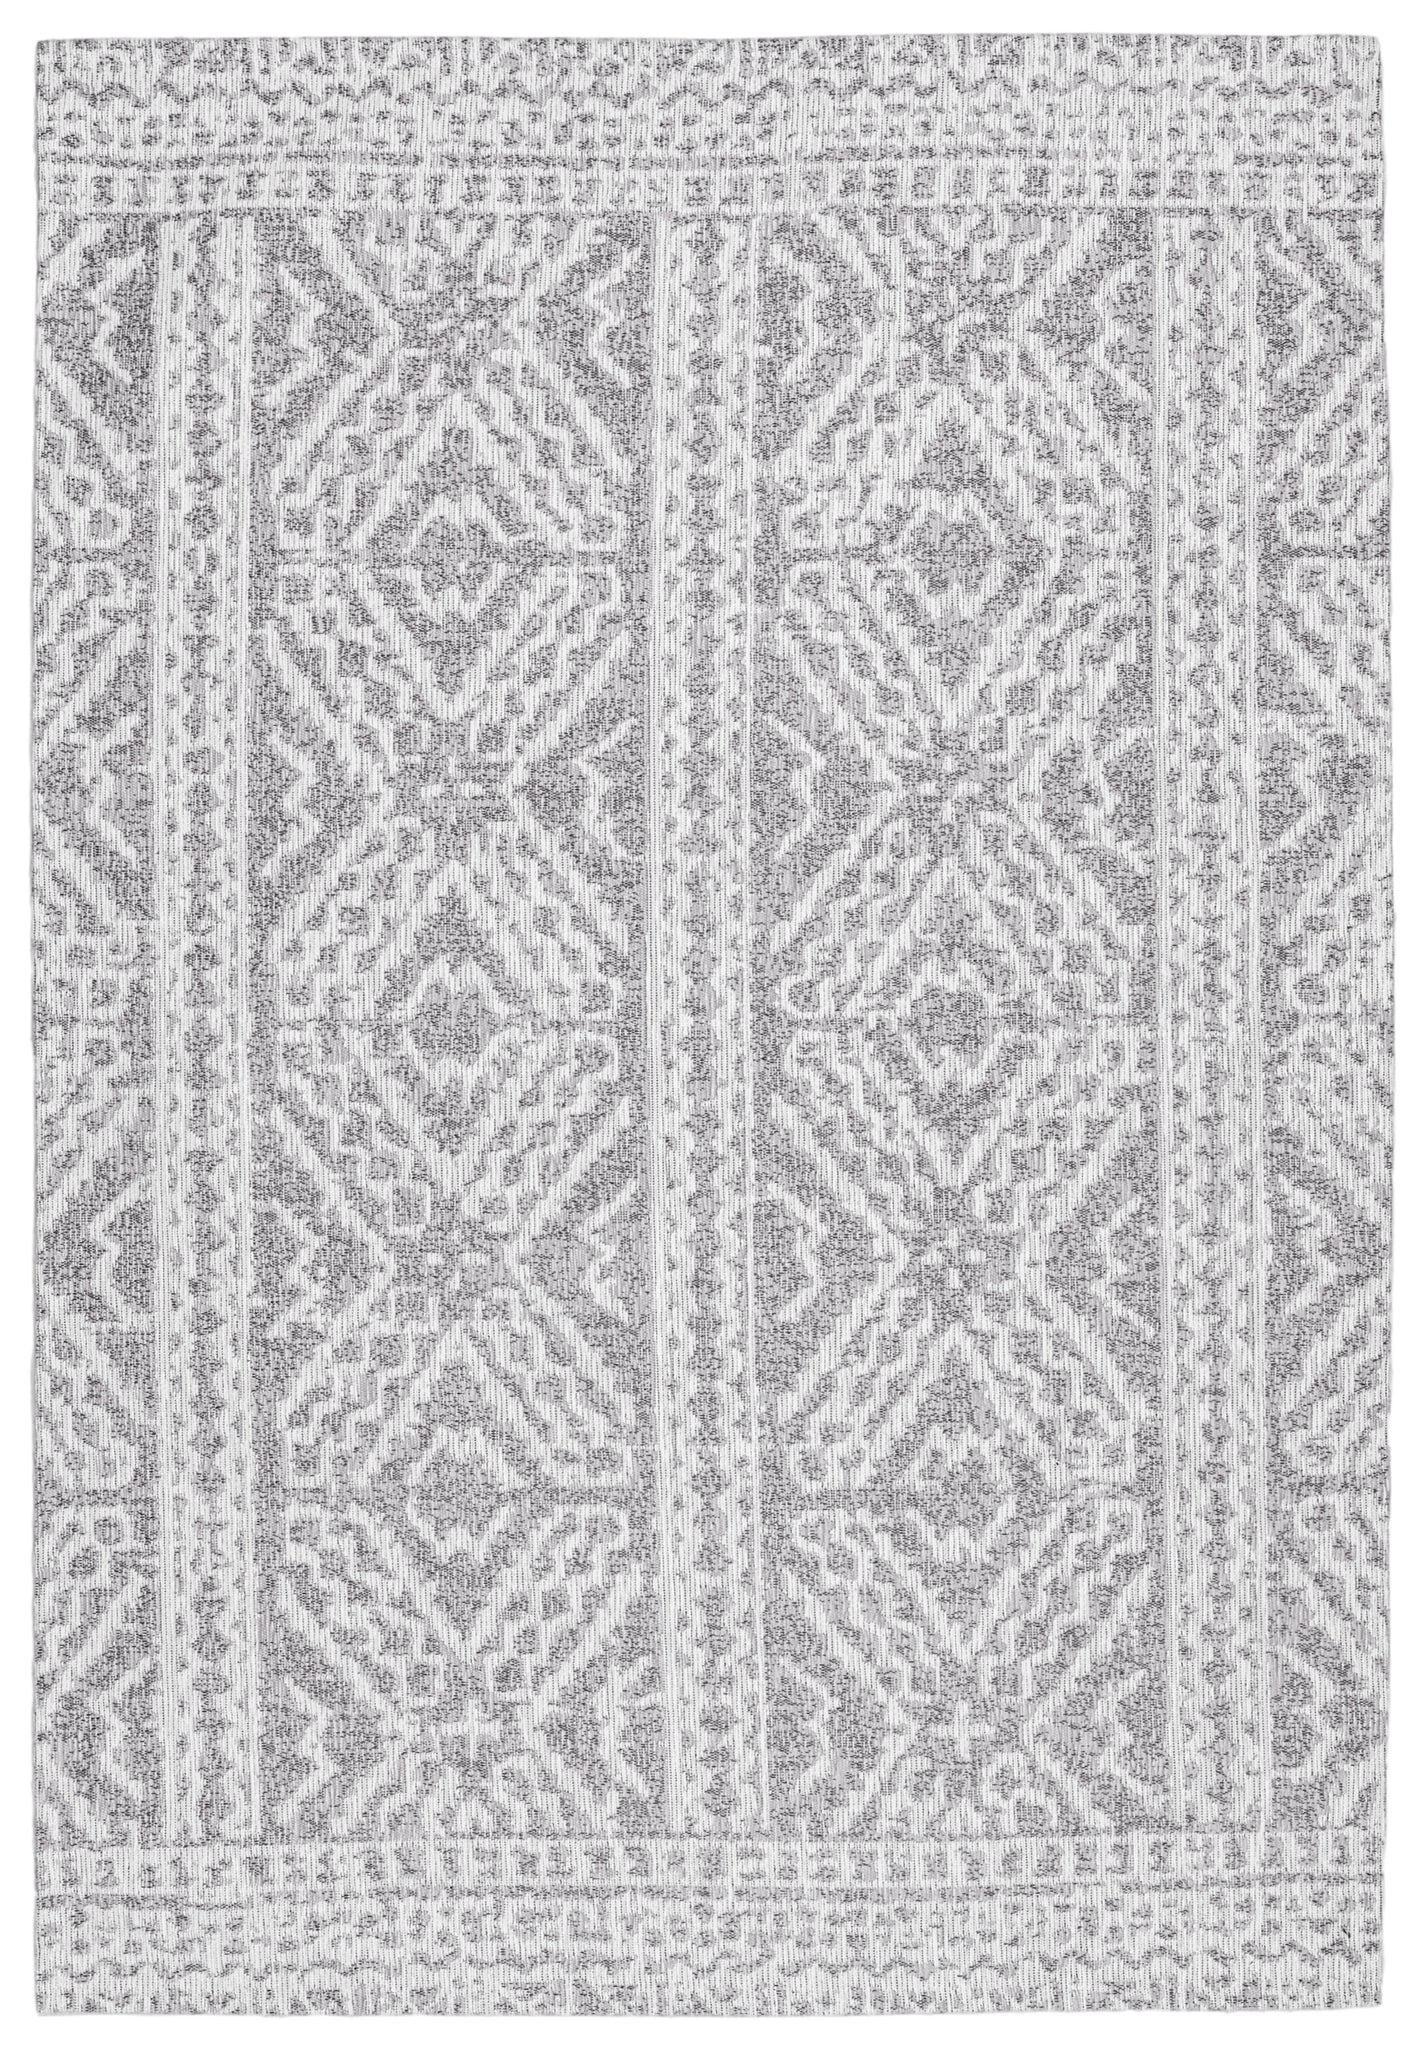 Washable Area rug | The Rugger Lillian | Gray & White | 5x8 | By MotherRuggers.com | Machine Washable | Jacquard Woven | Pet Friendly | Kid Friendly | Machine Wash | Line Dry | Living Room | Kitchen | Bedroom | High-Traffic | Anti-Slip | Three-year warranty with proper care | Shake or light Vacuum | Machine Wash as needed | Dry Flat or Line Dry | Dries fast